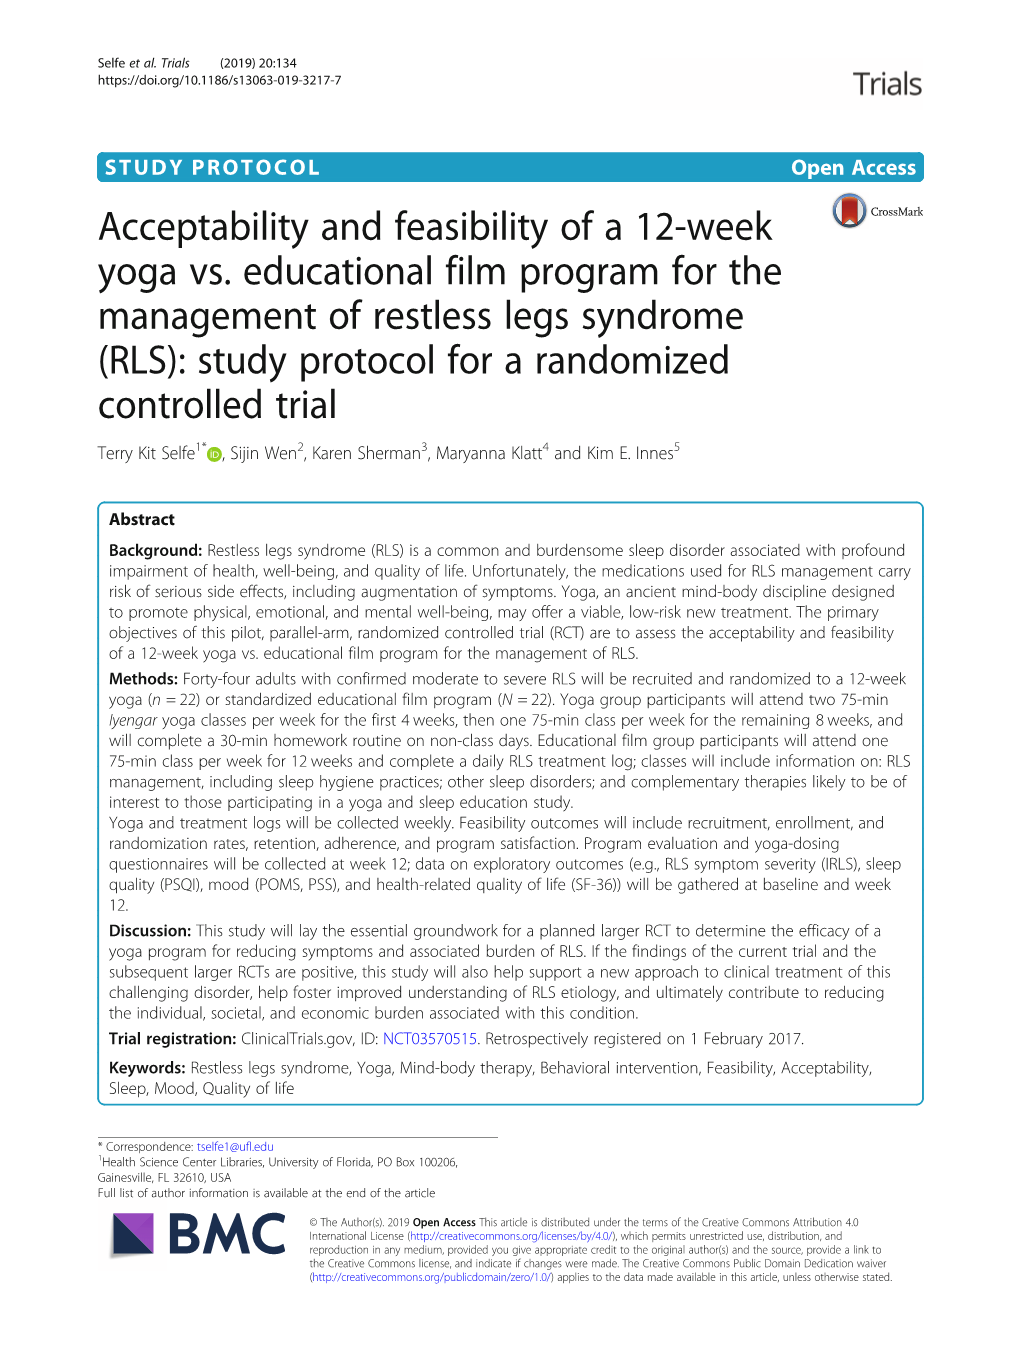 Acceptability and Feasibility of a 12-Week Yoga Vs. Educational Film Program for the Management of Restless Legs Syndrome (RLS)